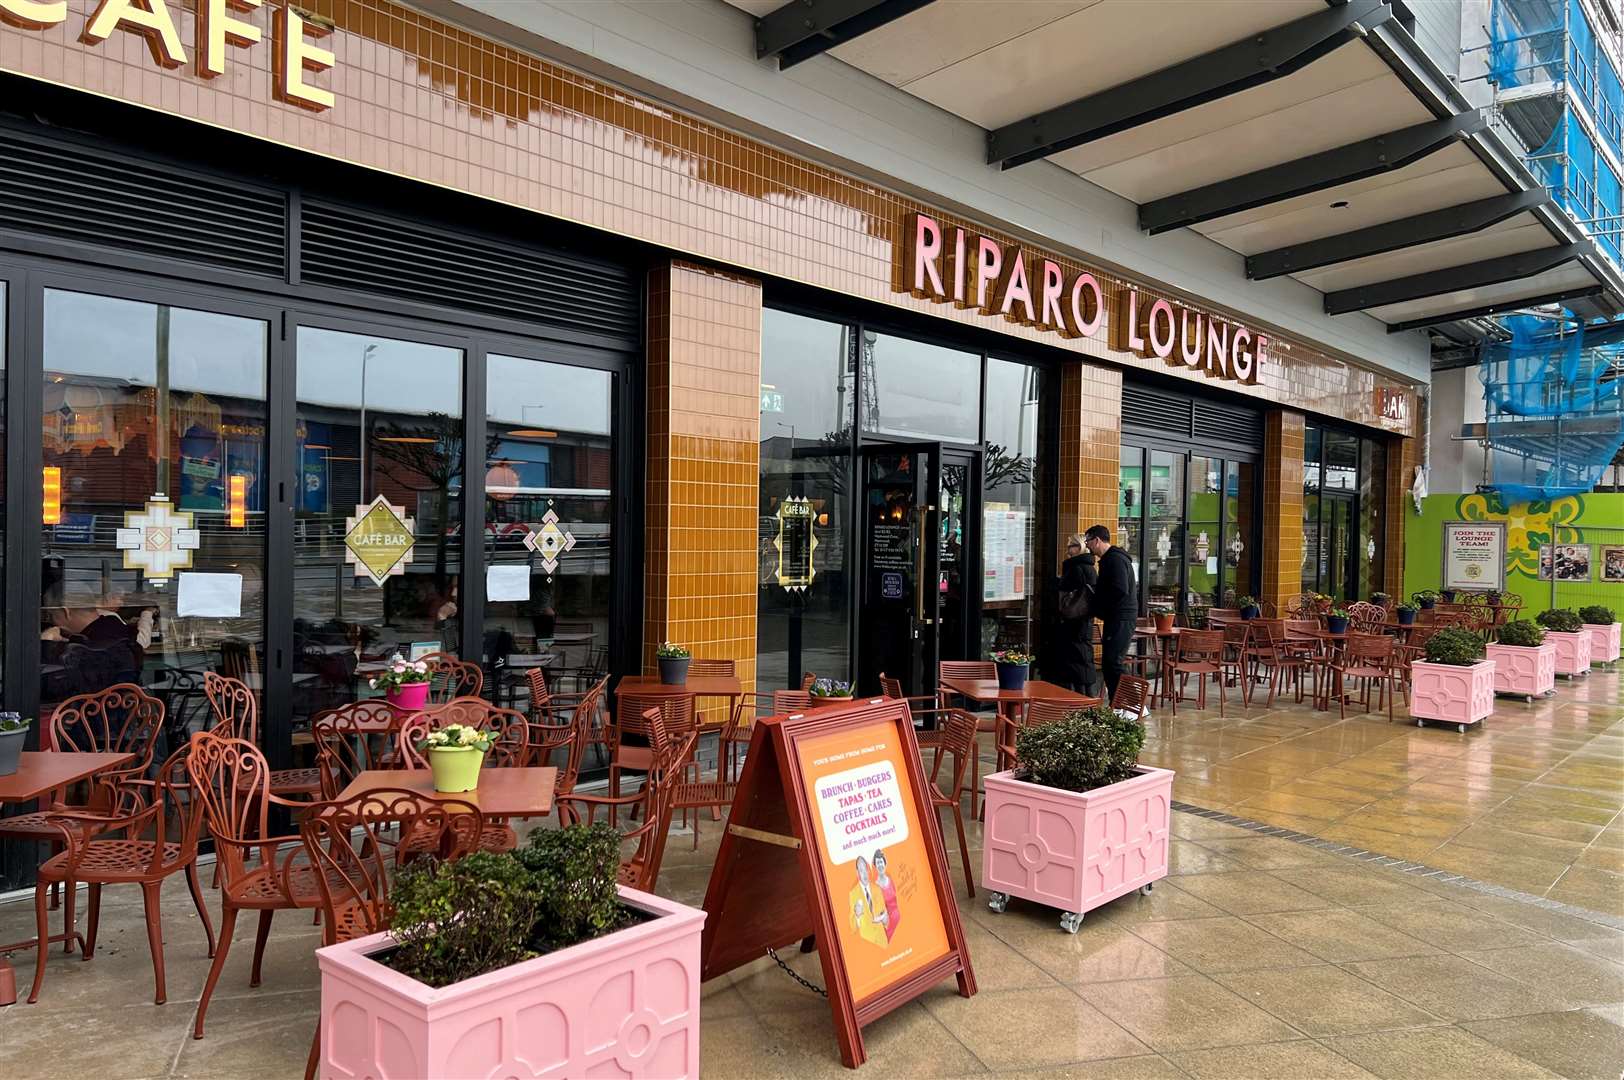 The Riparo Lounge is one of the Loungers groups Kent restaurants